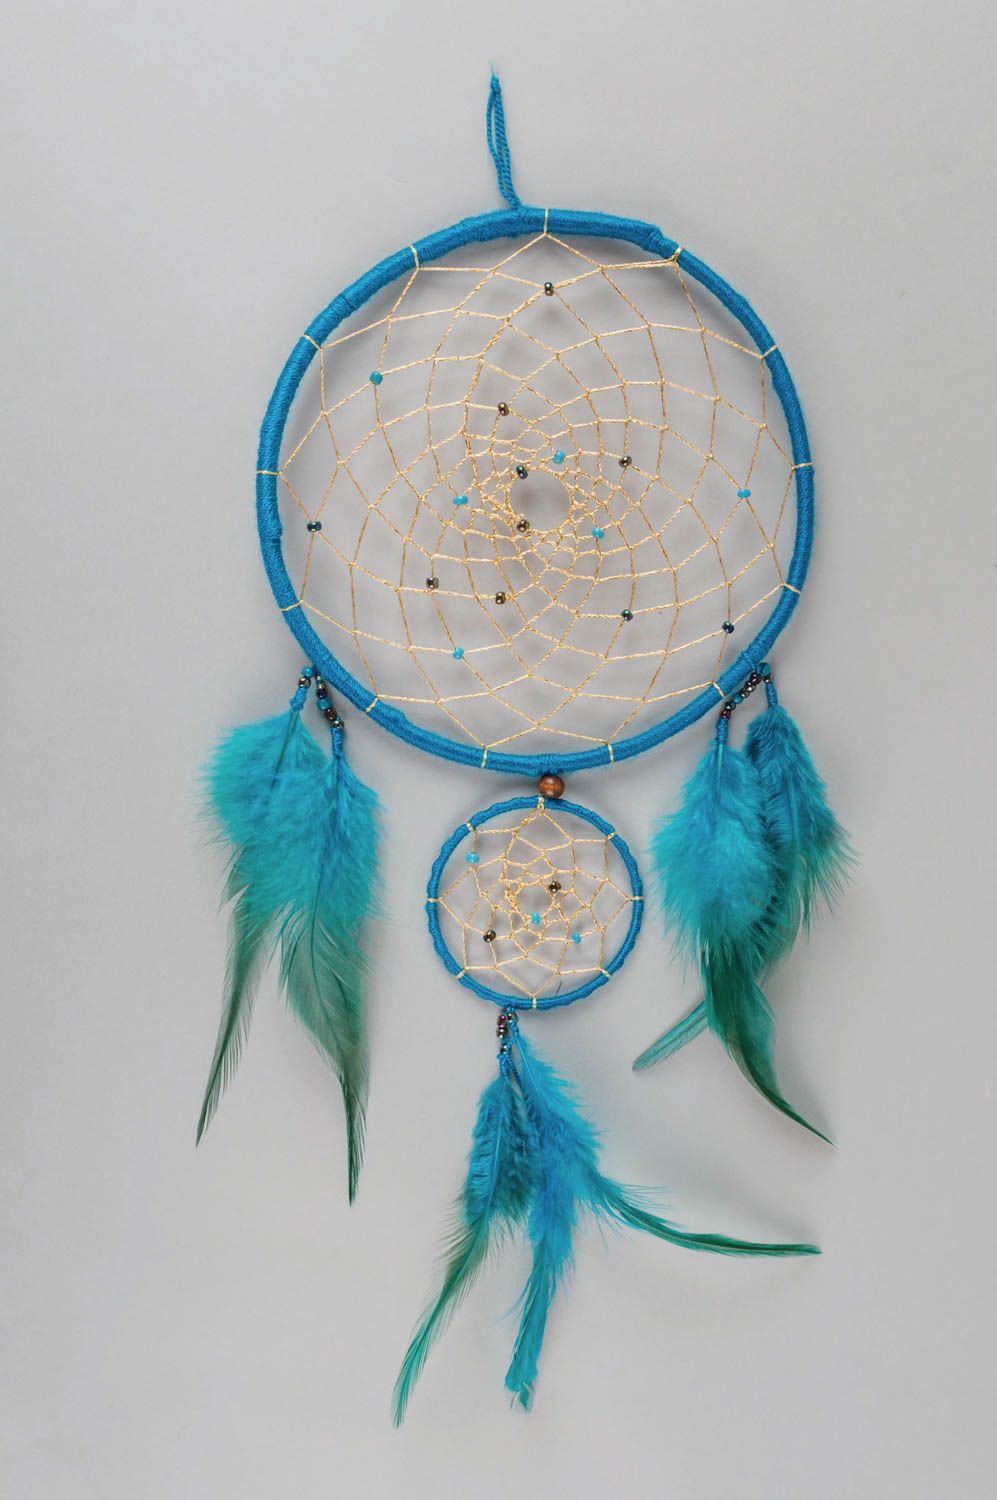 Unusual handmade dreamcatcher Indian amulet living room designs wall hanging photo 2